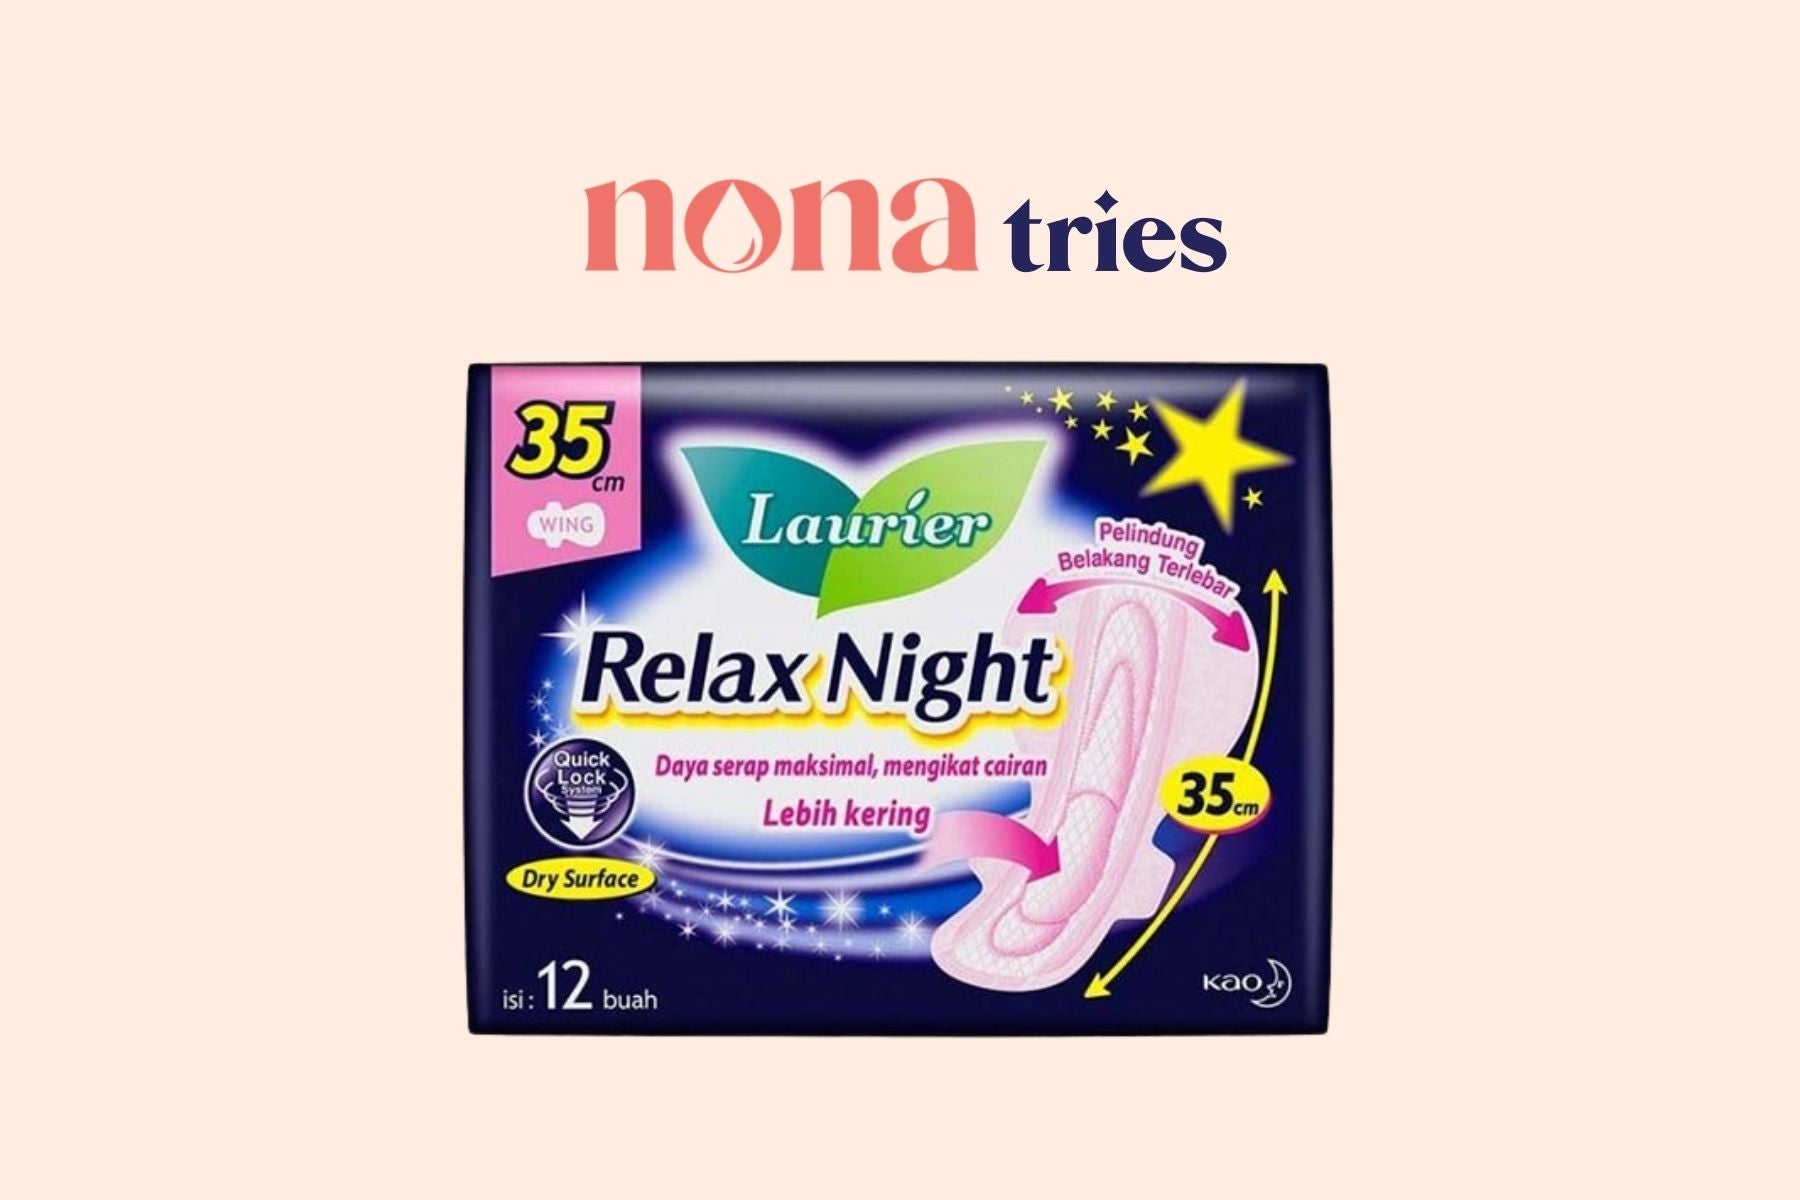 Nona Tries: Laurier Relax Night 35cm + Wing